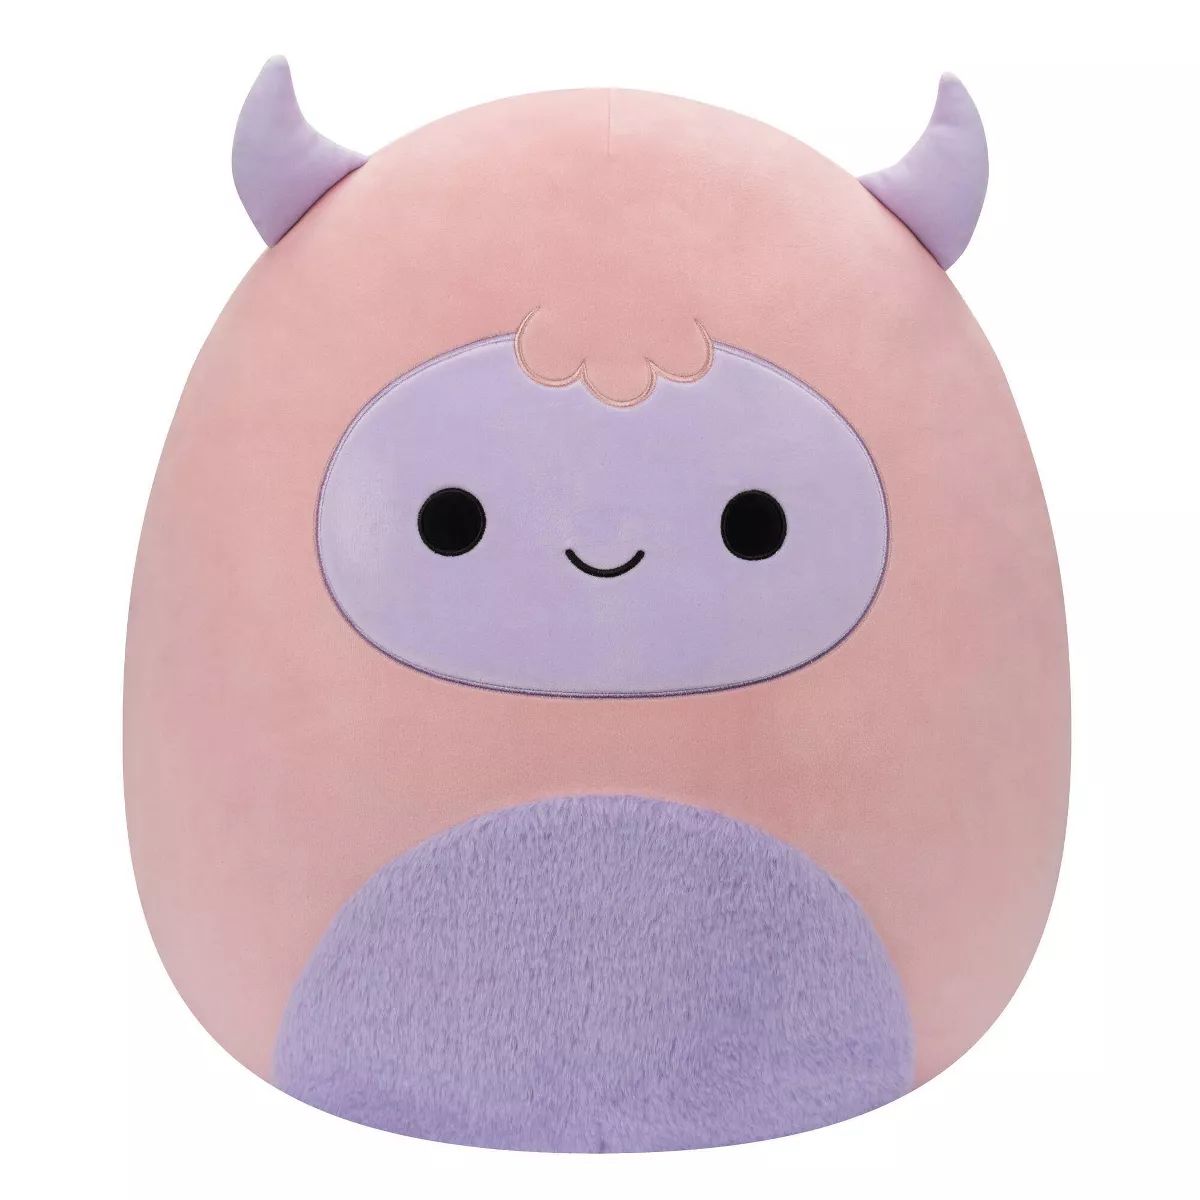 Squishmallows 11" Ronalda the Pink and Purple Yeti Plush Toy (Target Exclusive) | Target